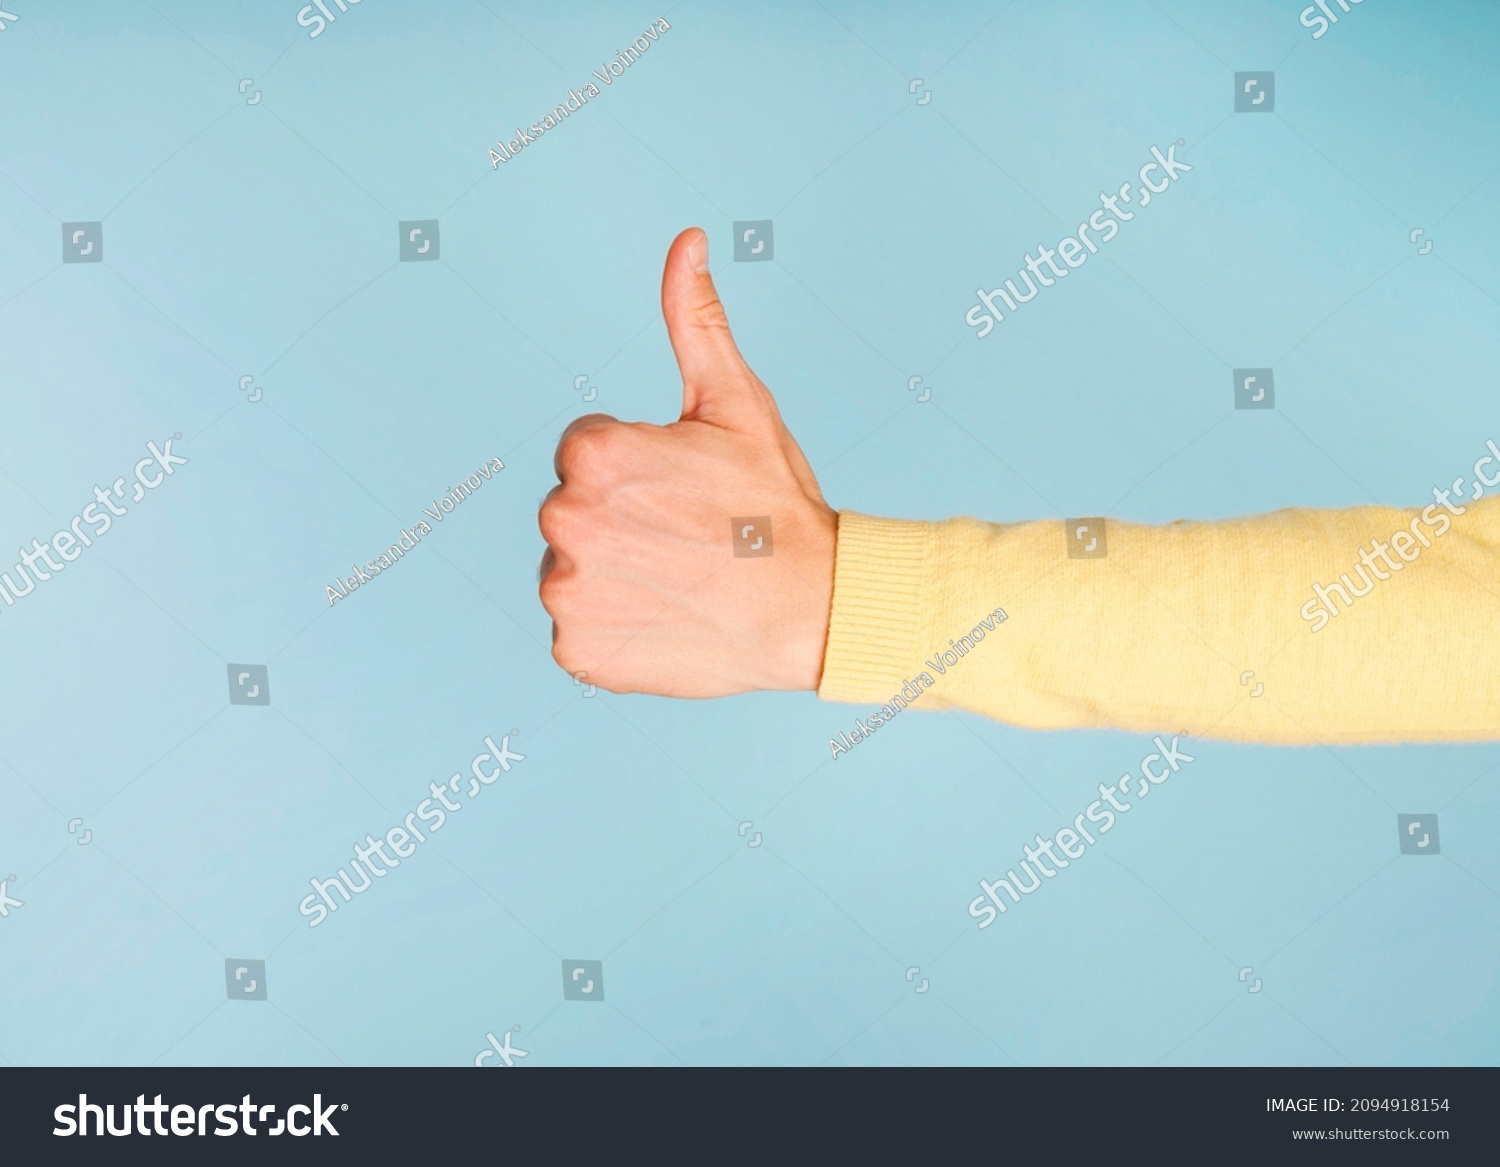 Thump up hand sign isolated on blue background. Copy space for your text #2094918154